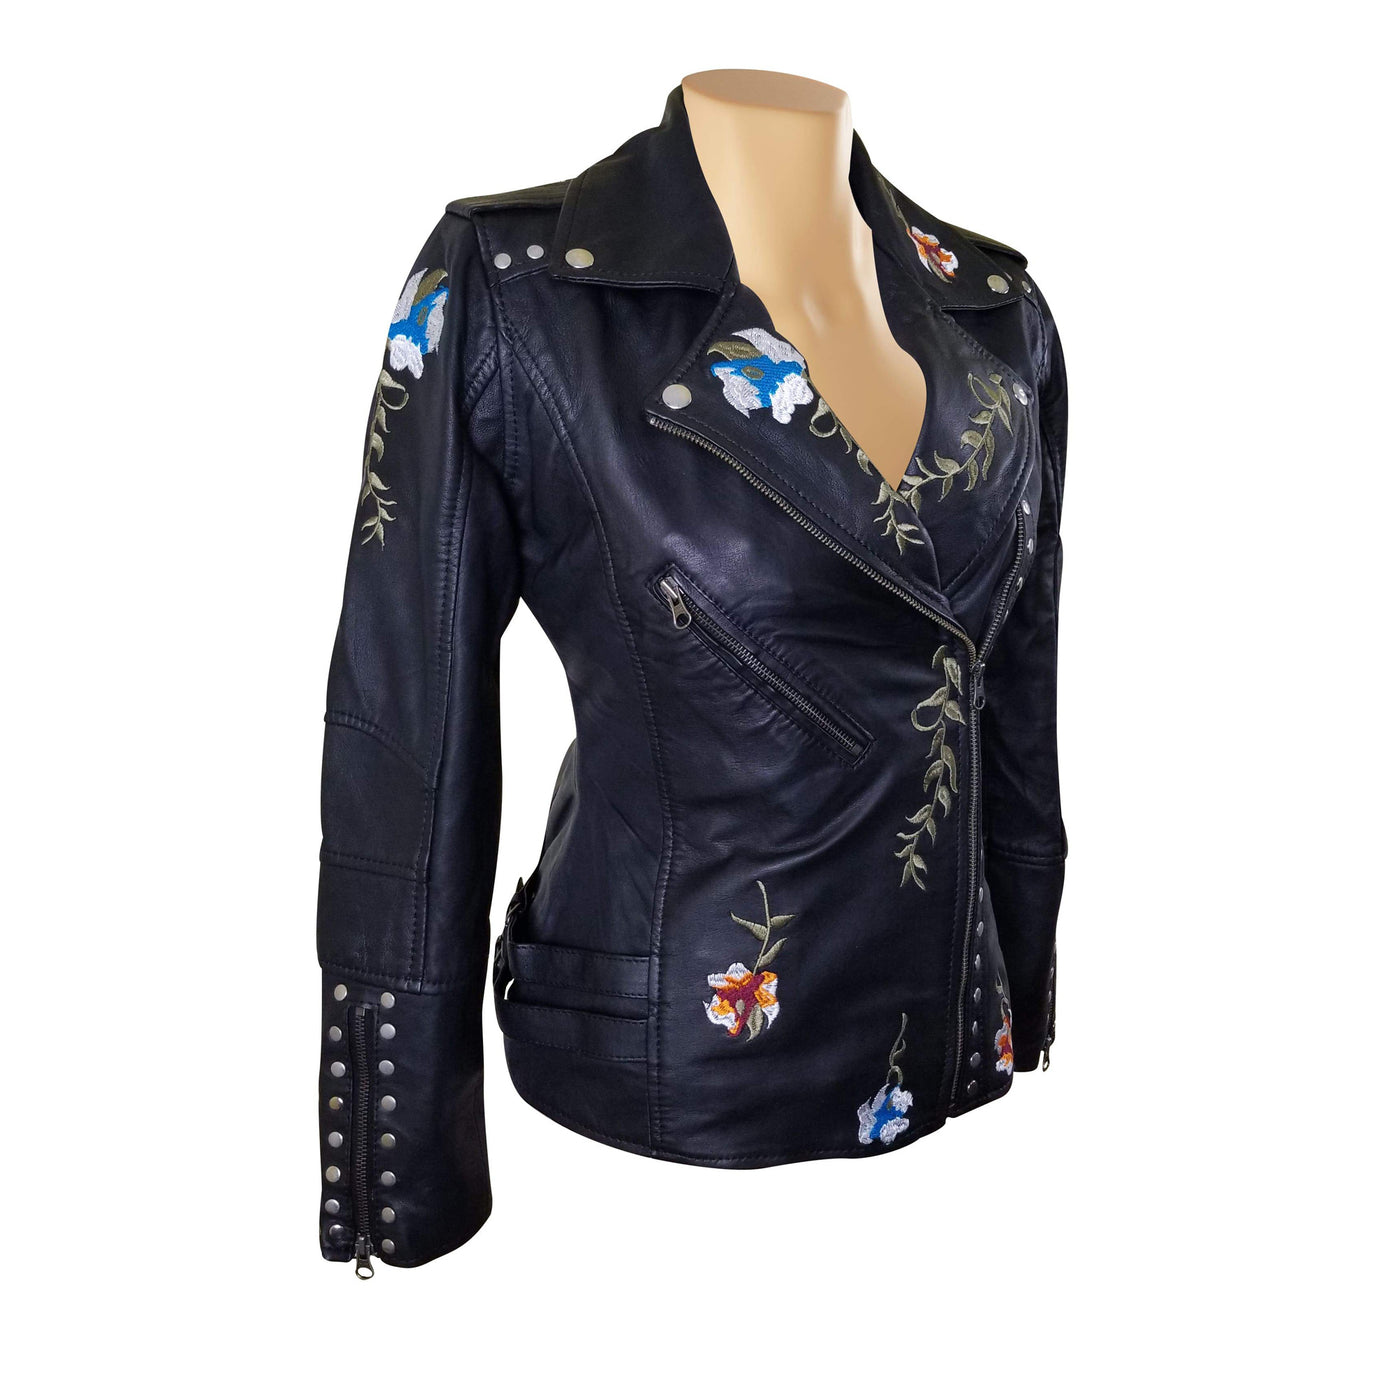 Flowery Embroidered Leather Jacket With Studs